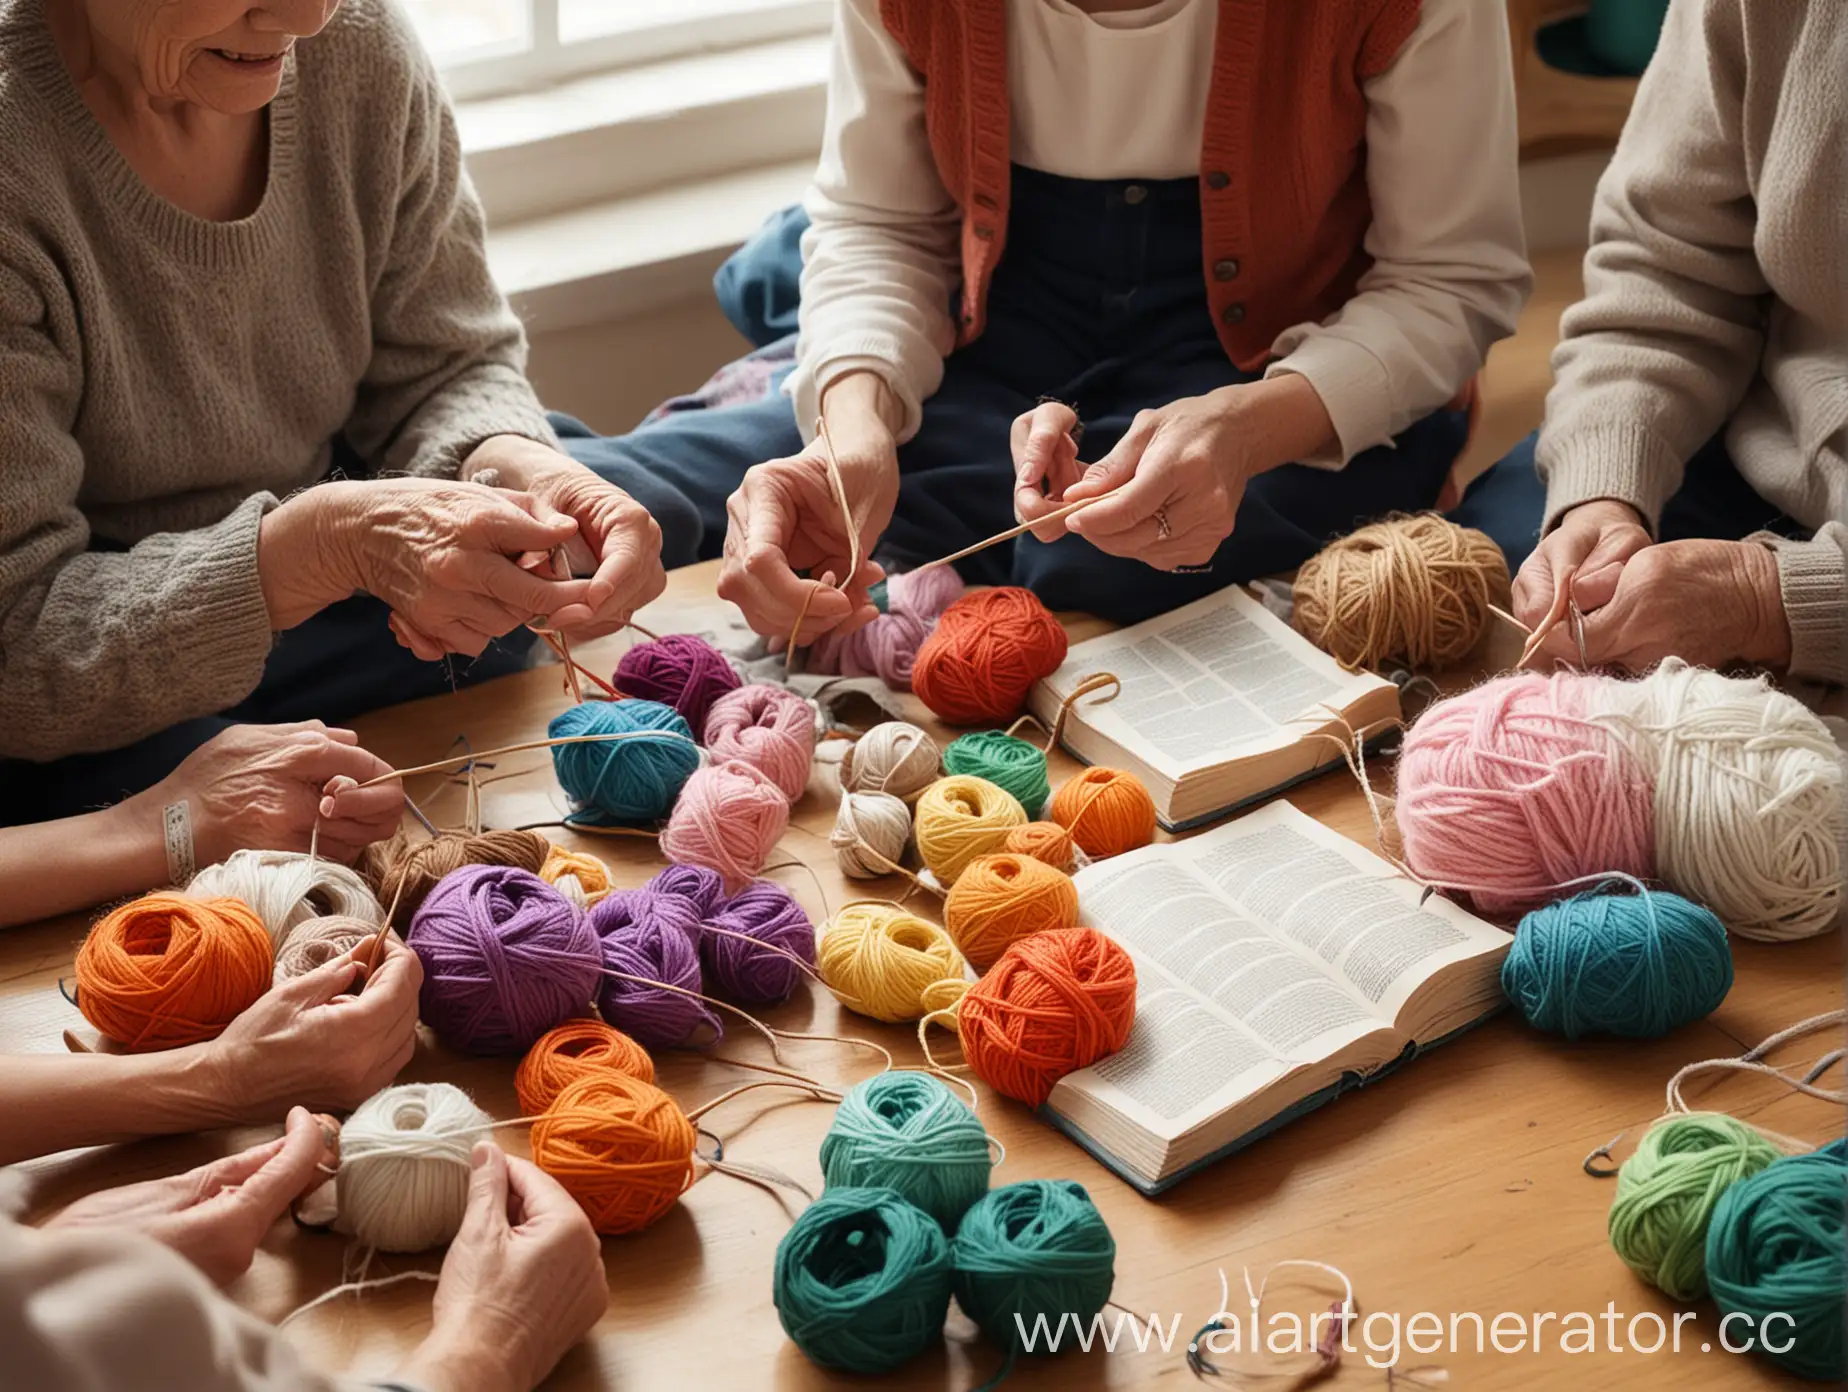 Multigenerational-Knitting-with-Colorful-Yarn-and-Language-Learning